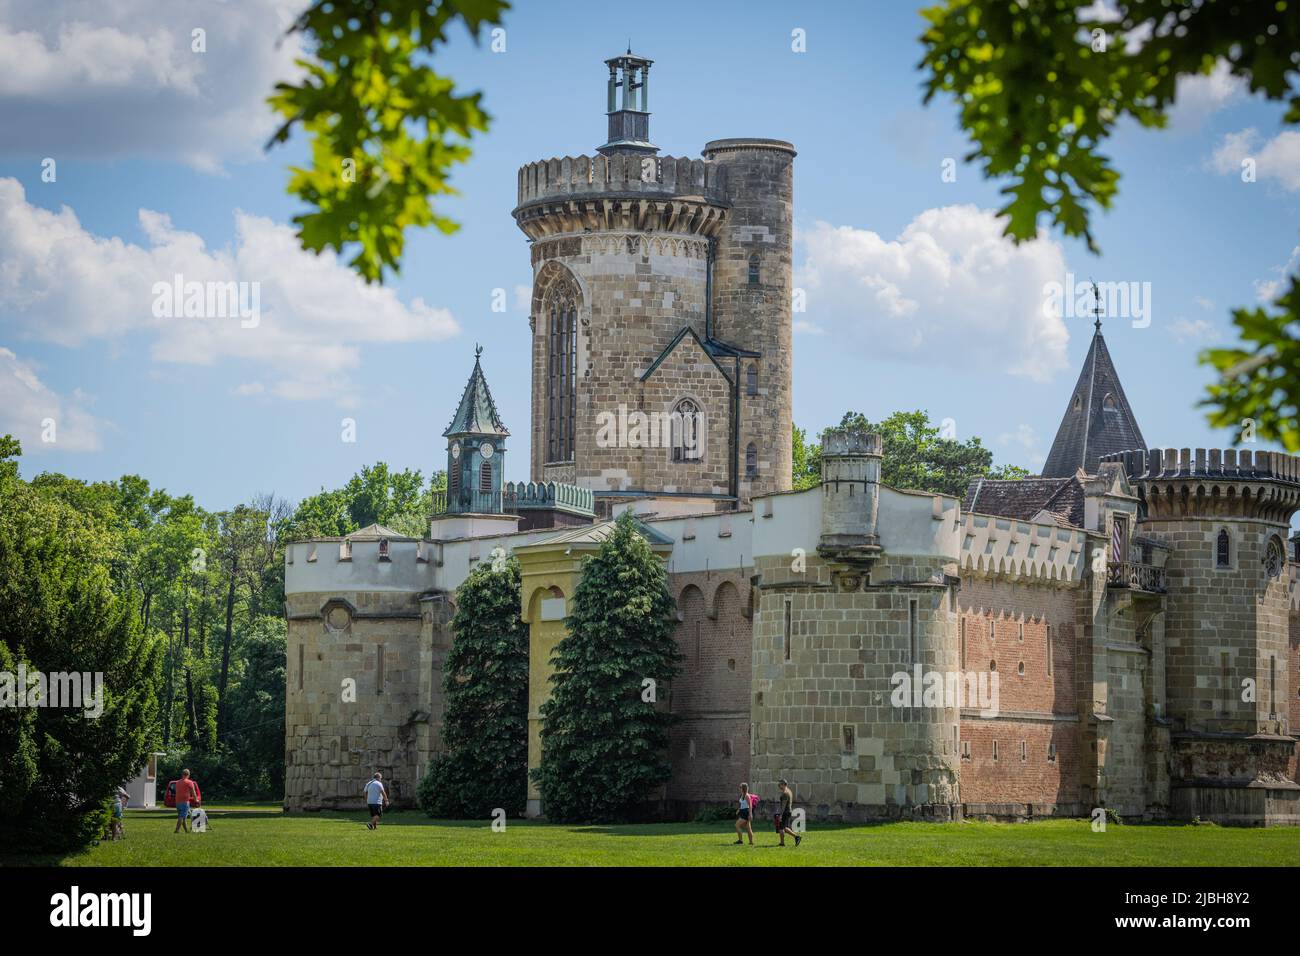 The castles of Laxenburg are located in the municipality of Laxenburg in Lower Austria in the castle park is the old castle and the Franzensburg Stock Photo